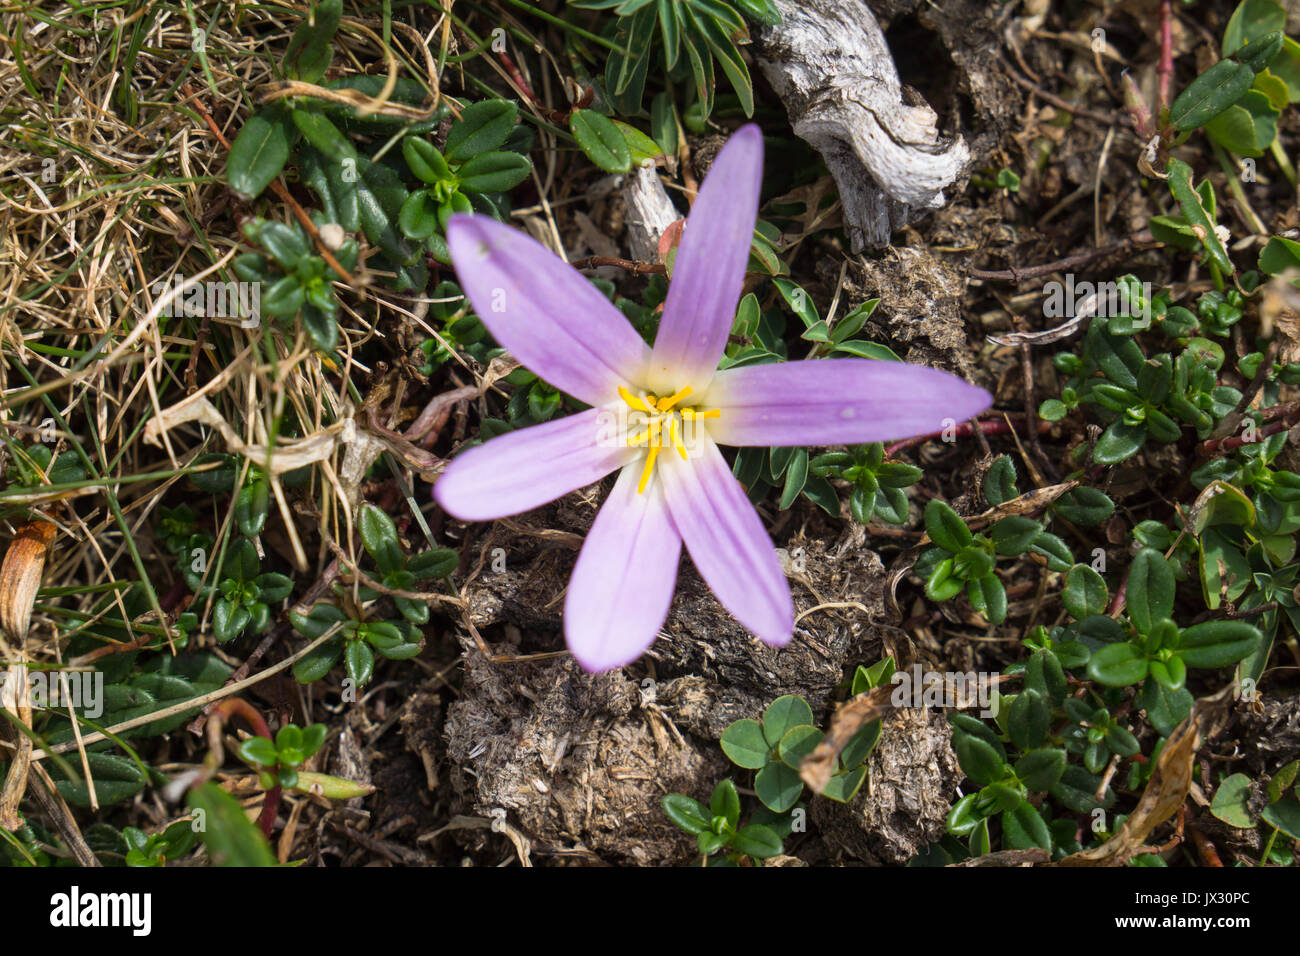 Colchicum montanum, Merendera montana of the Colchicaceae family of bulbous plants found in the high pastures of the picos de europa in abundance Stock Photo